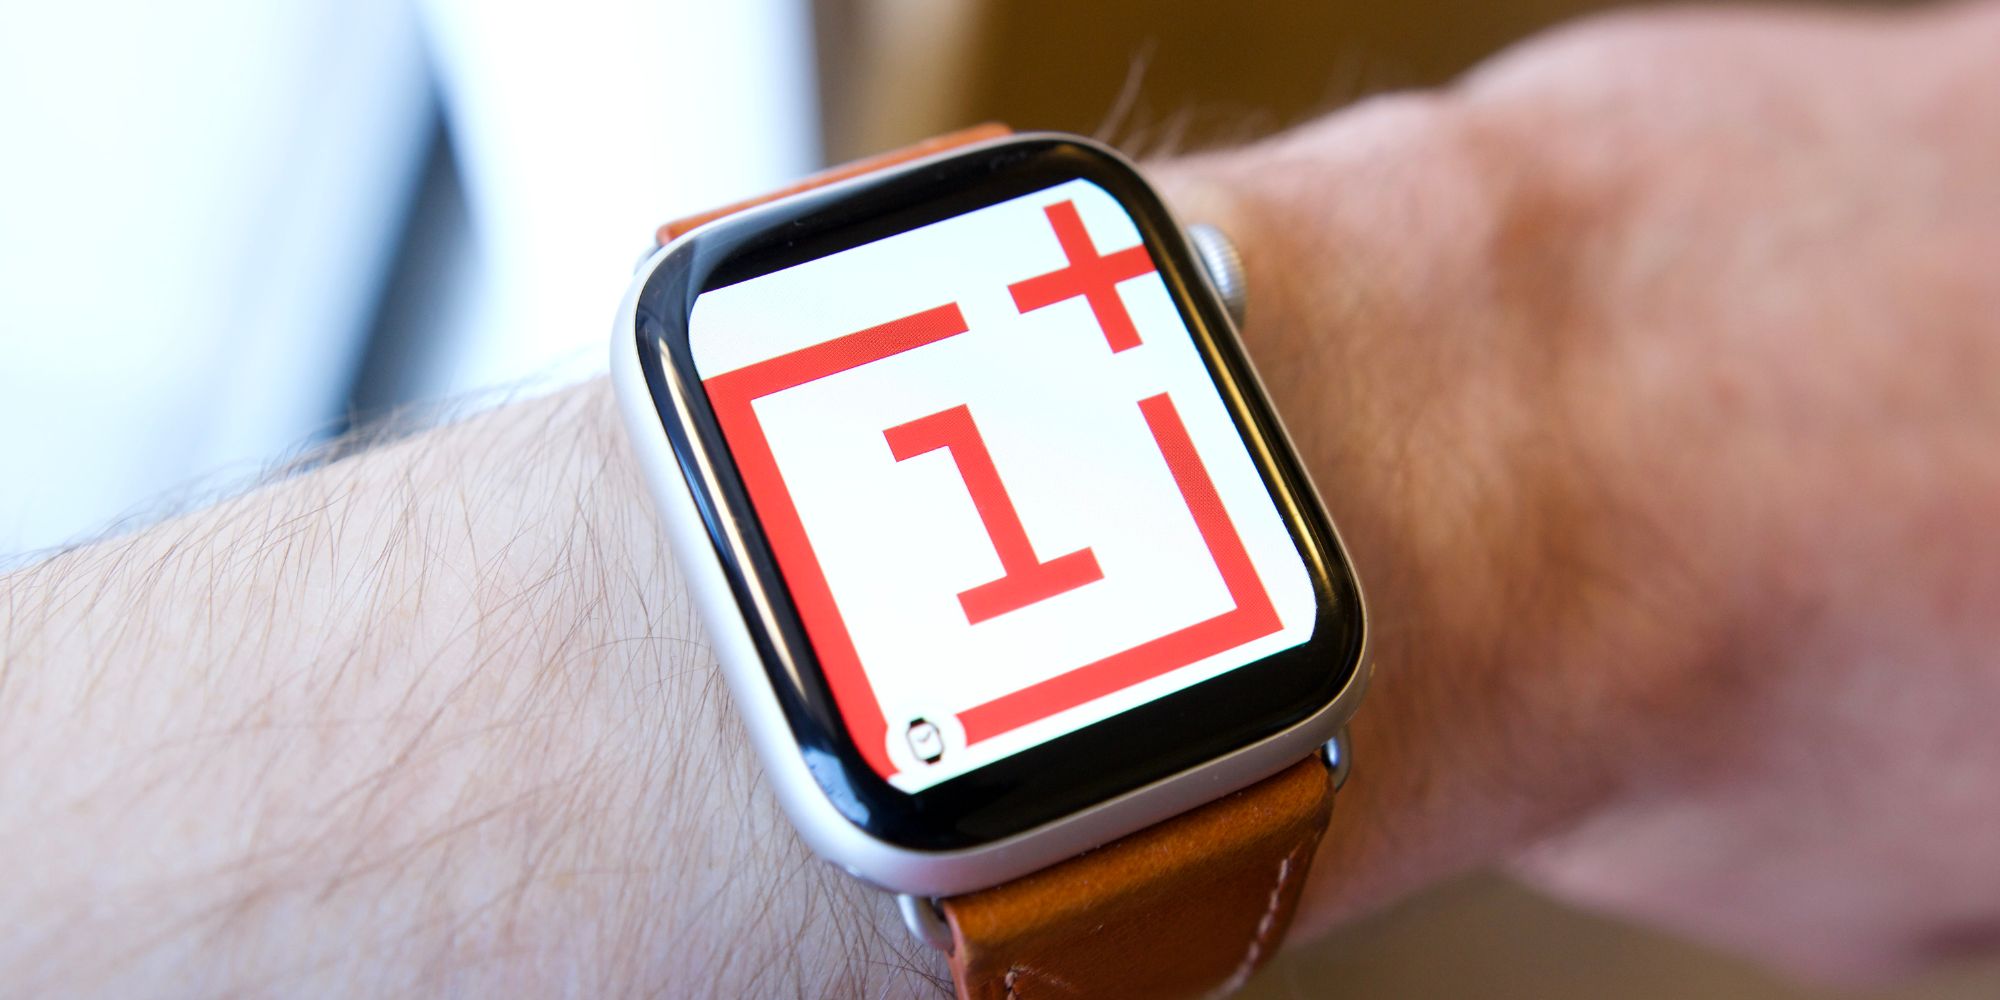 Apple Watch with OnePlus logo